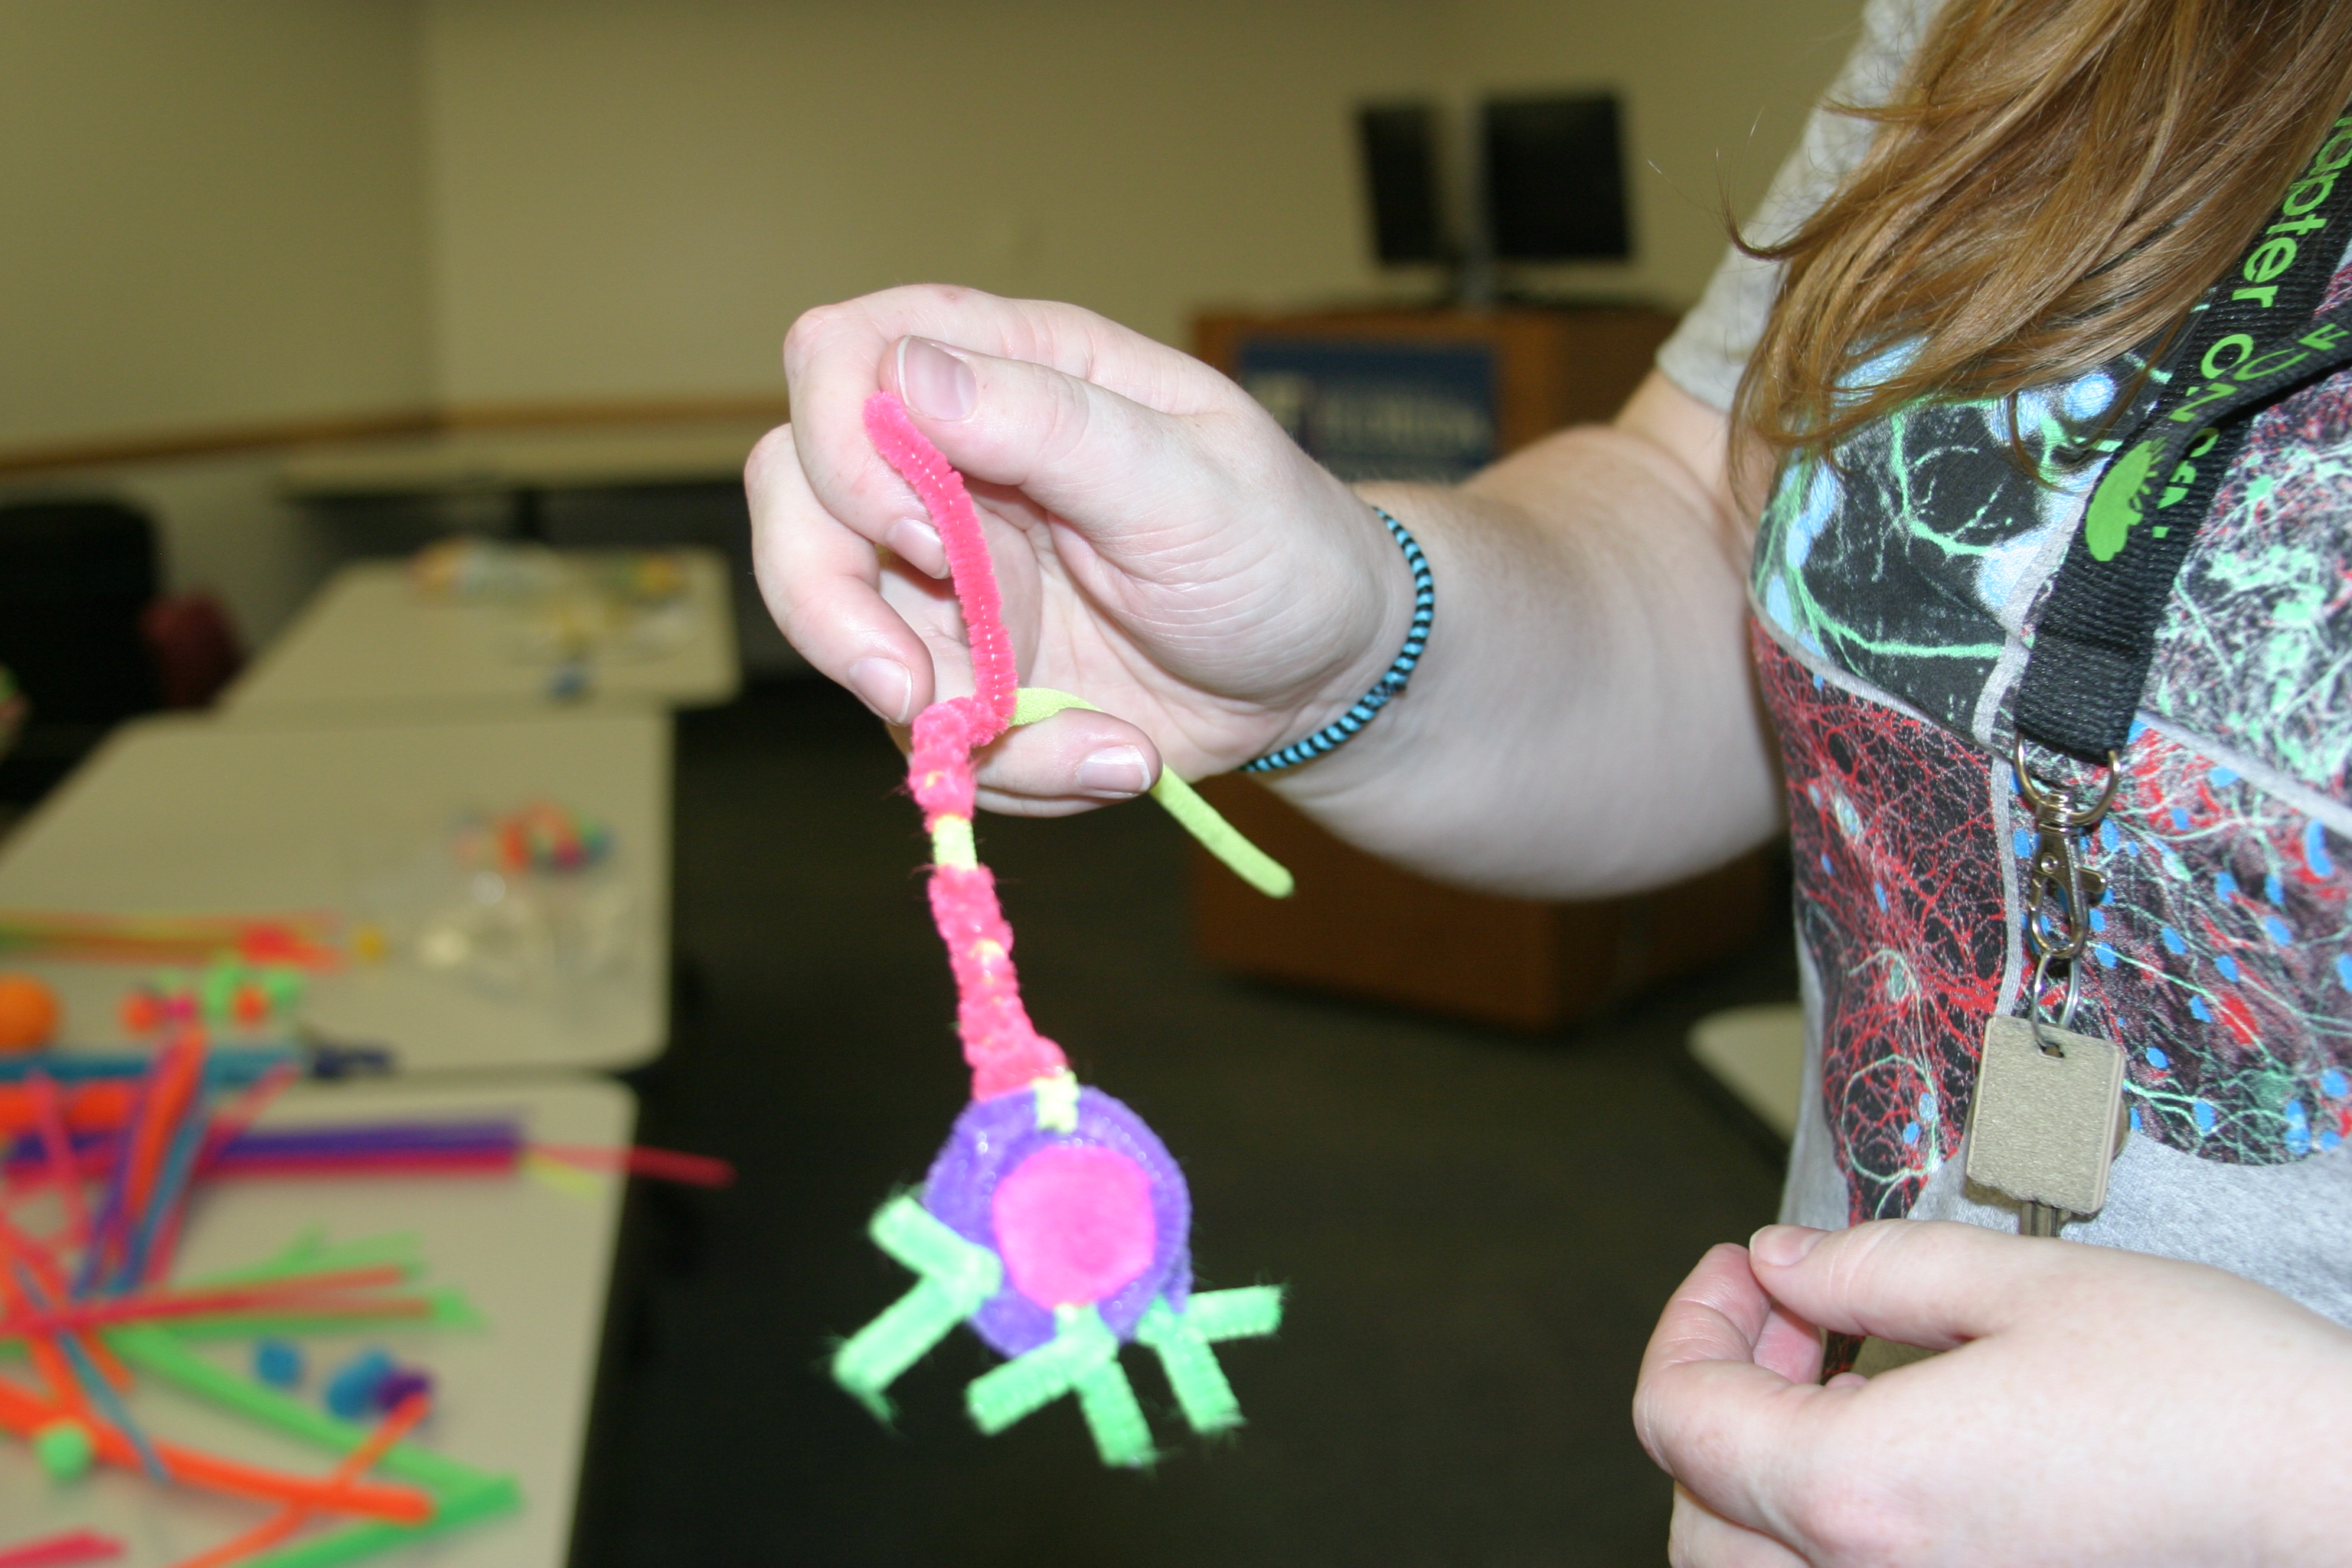 A “neuron” made out of pipe cleaners.